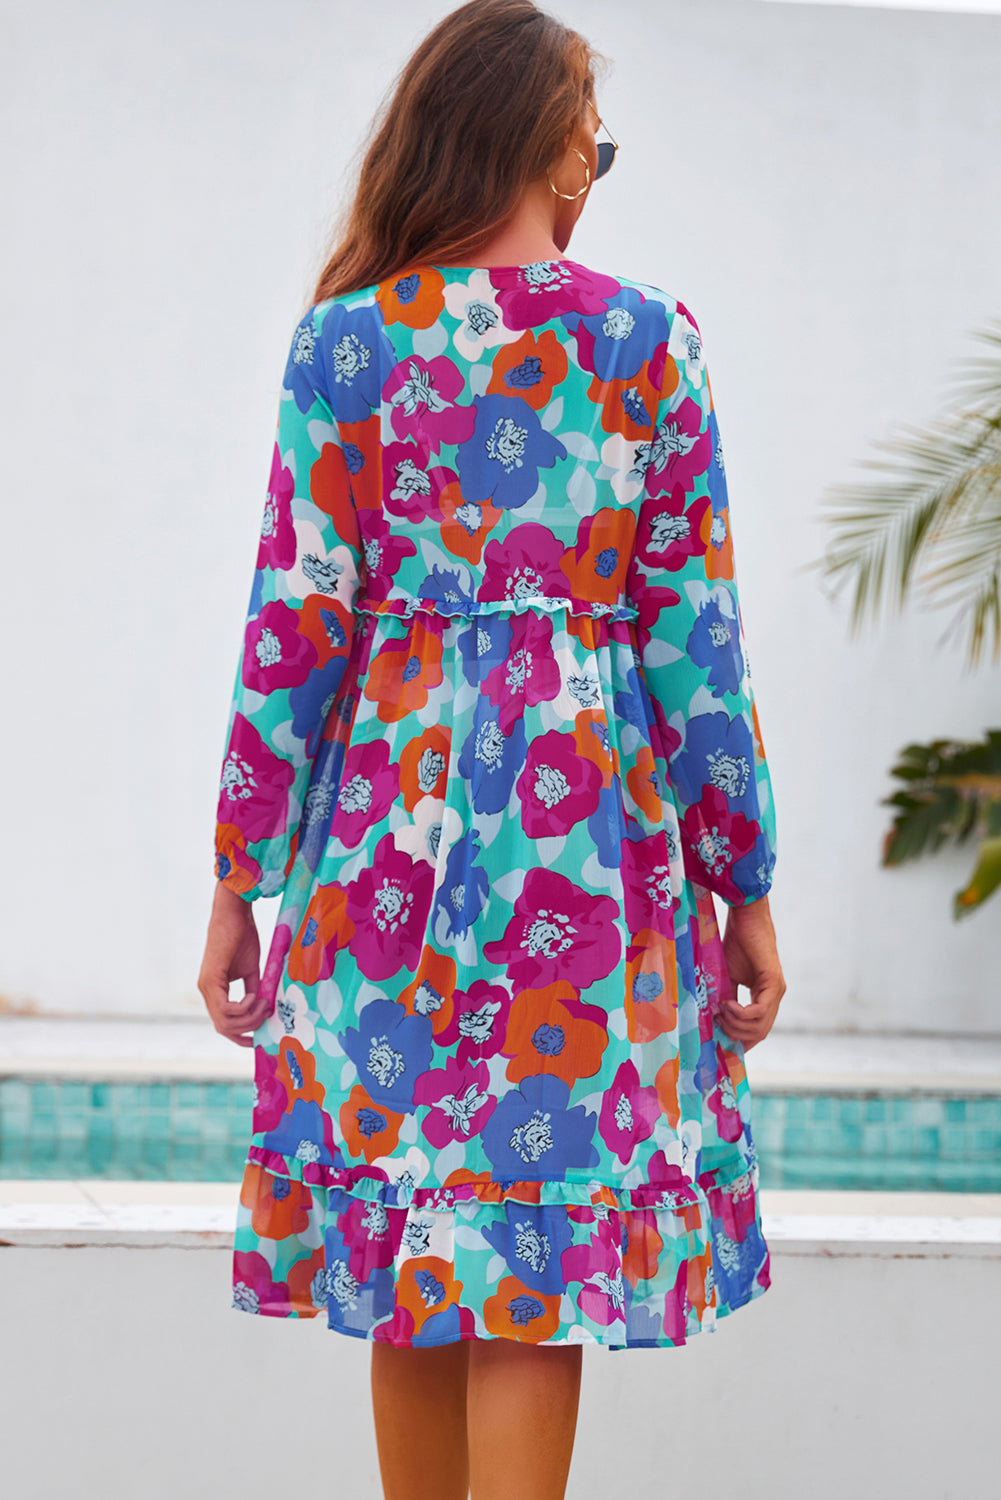 Floral Resort Style Swim Cover